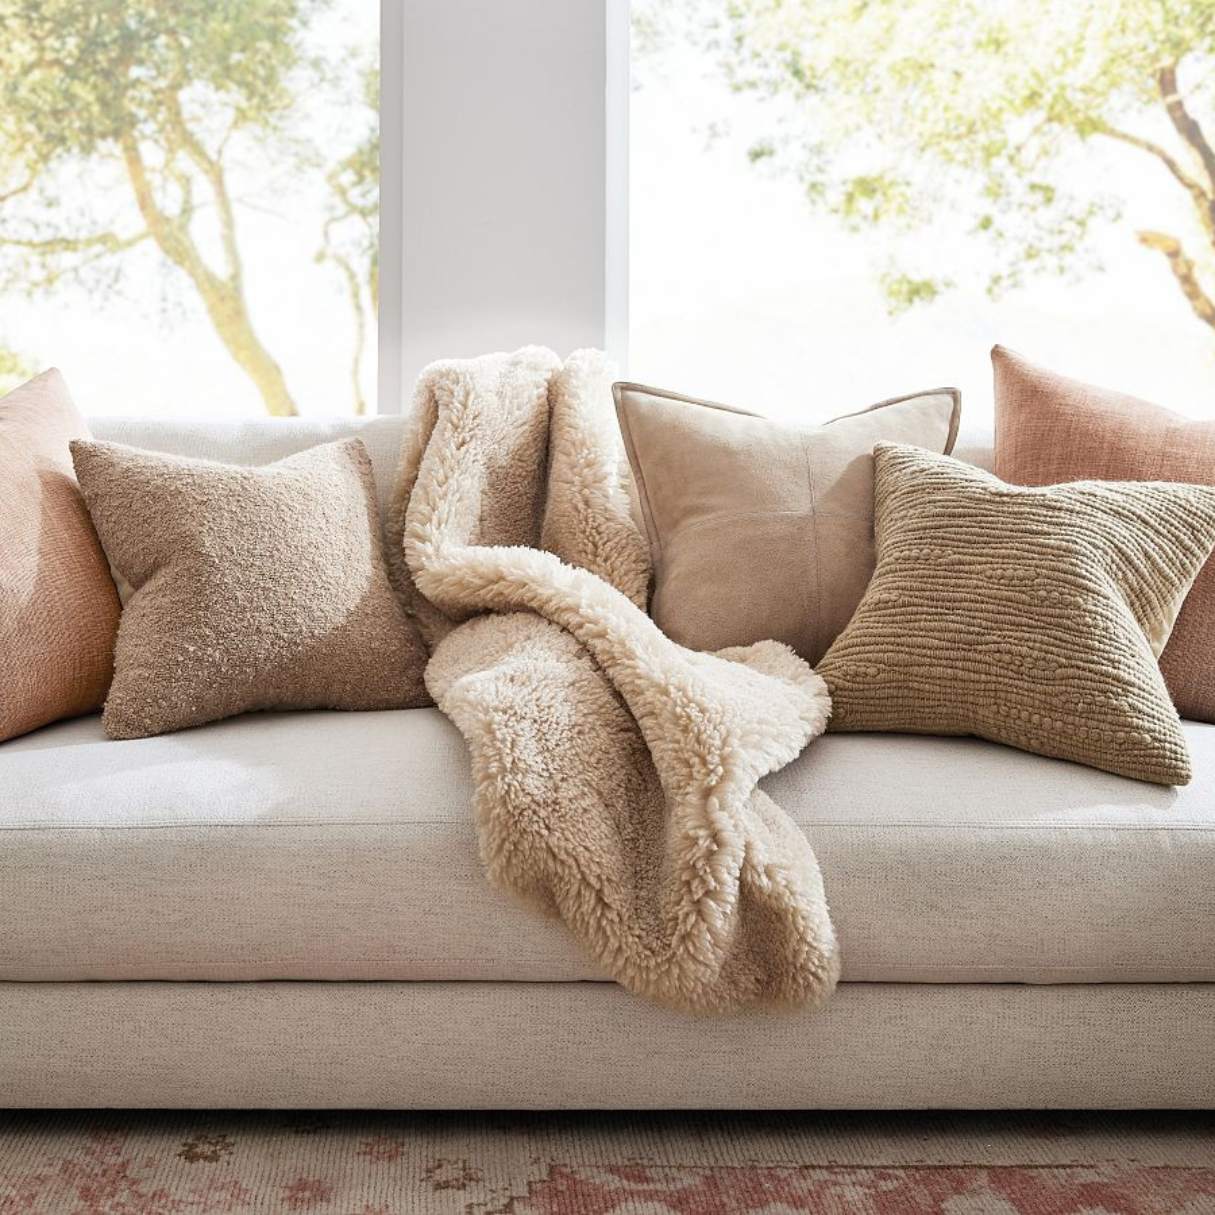 How To Clean Suede Couch Pillows